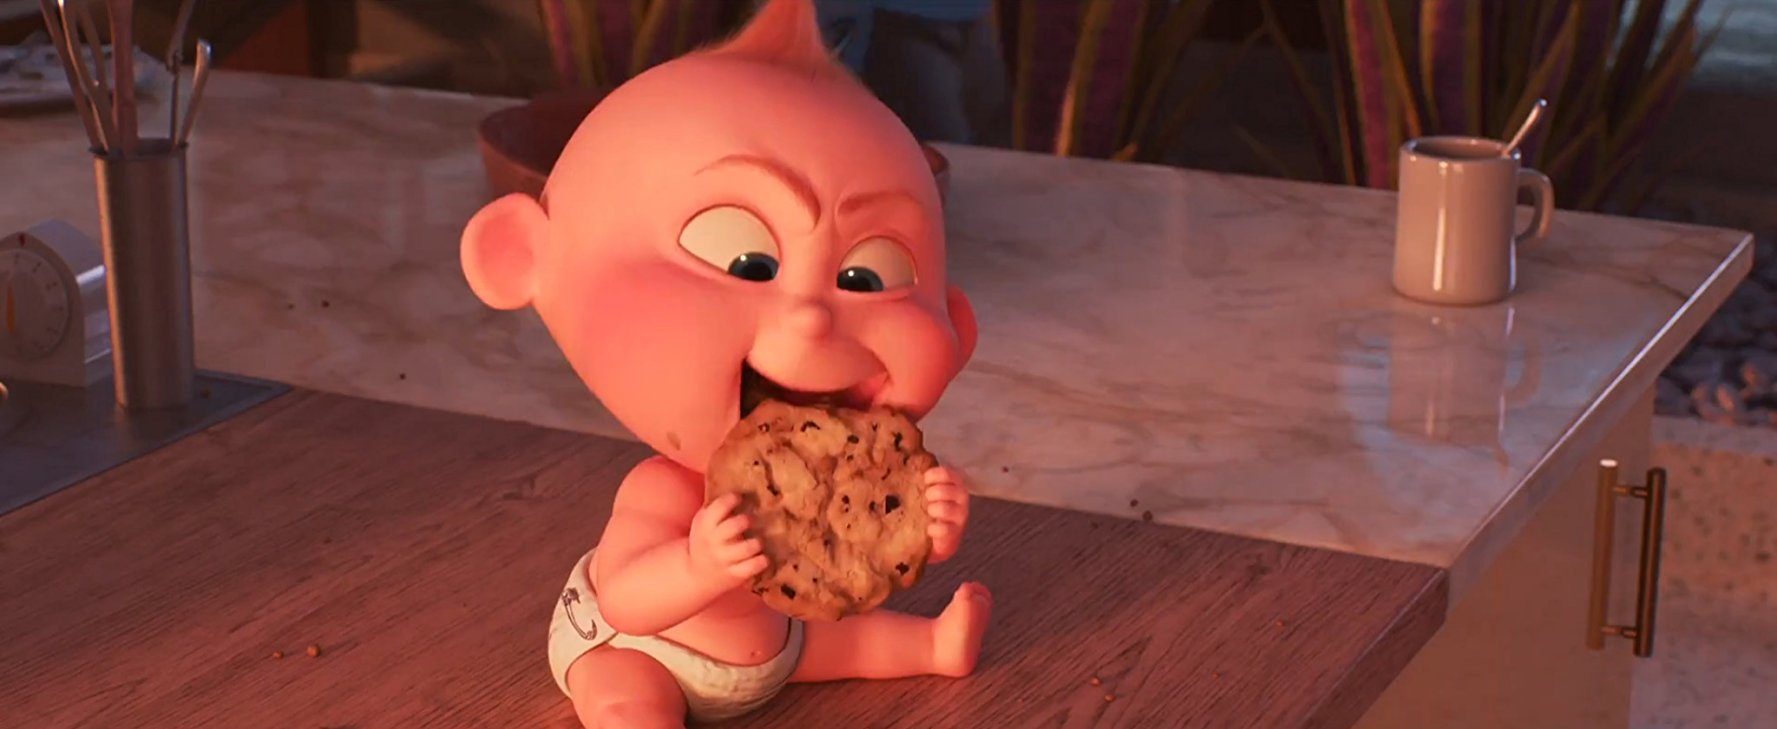 COOKIE. Baby Jack-Jack has more powers than all his family members combined – but he's easily distracted by cookies. Photo courtesy of Disney-Pixar 